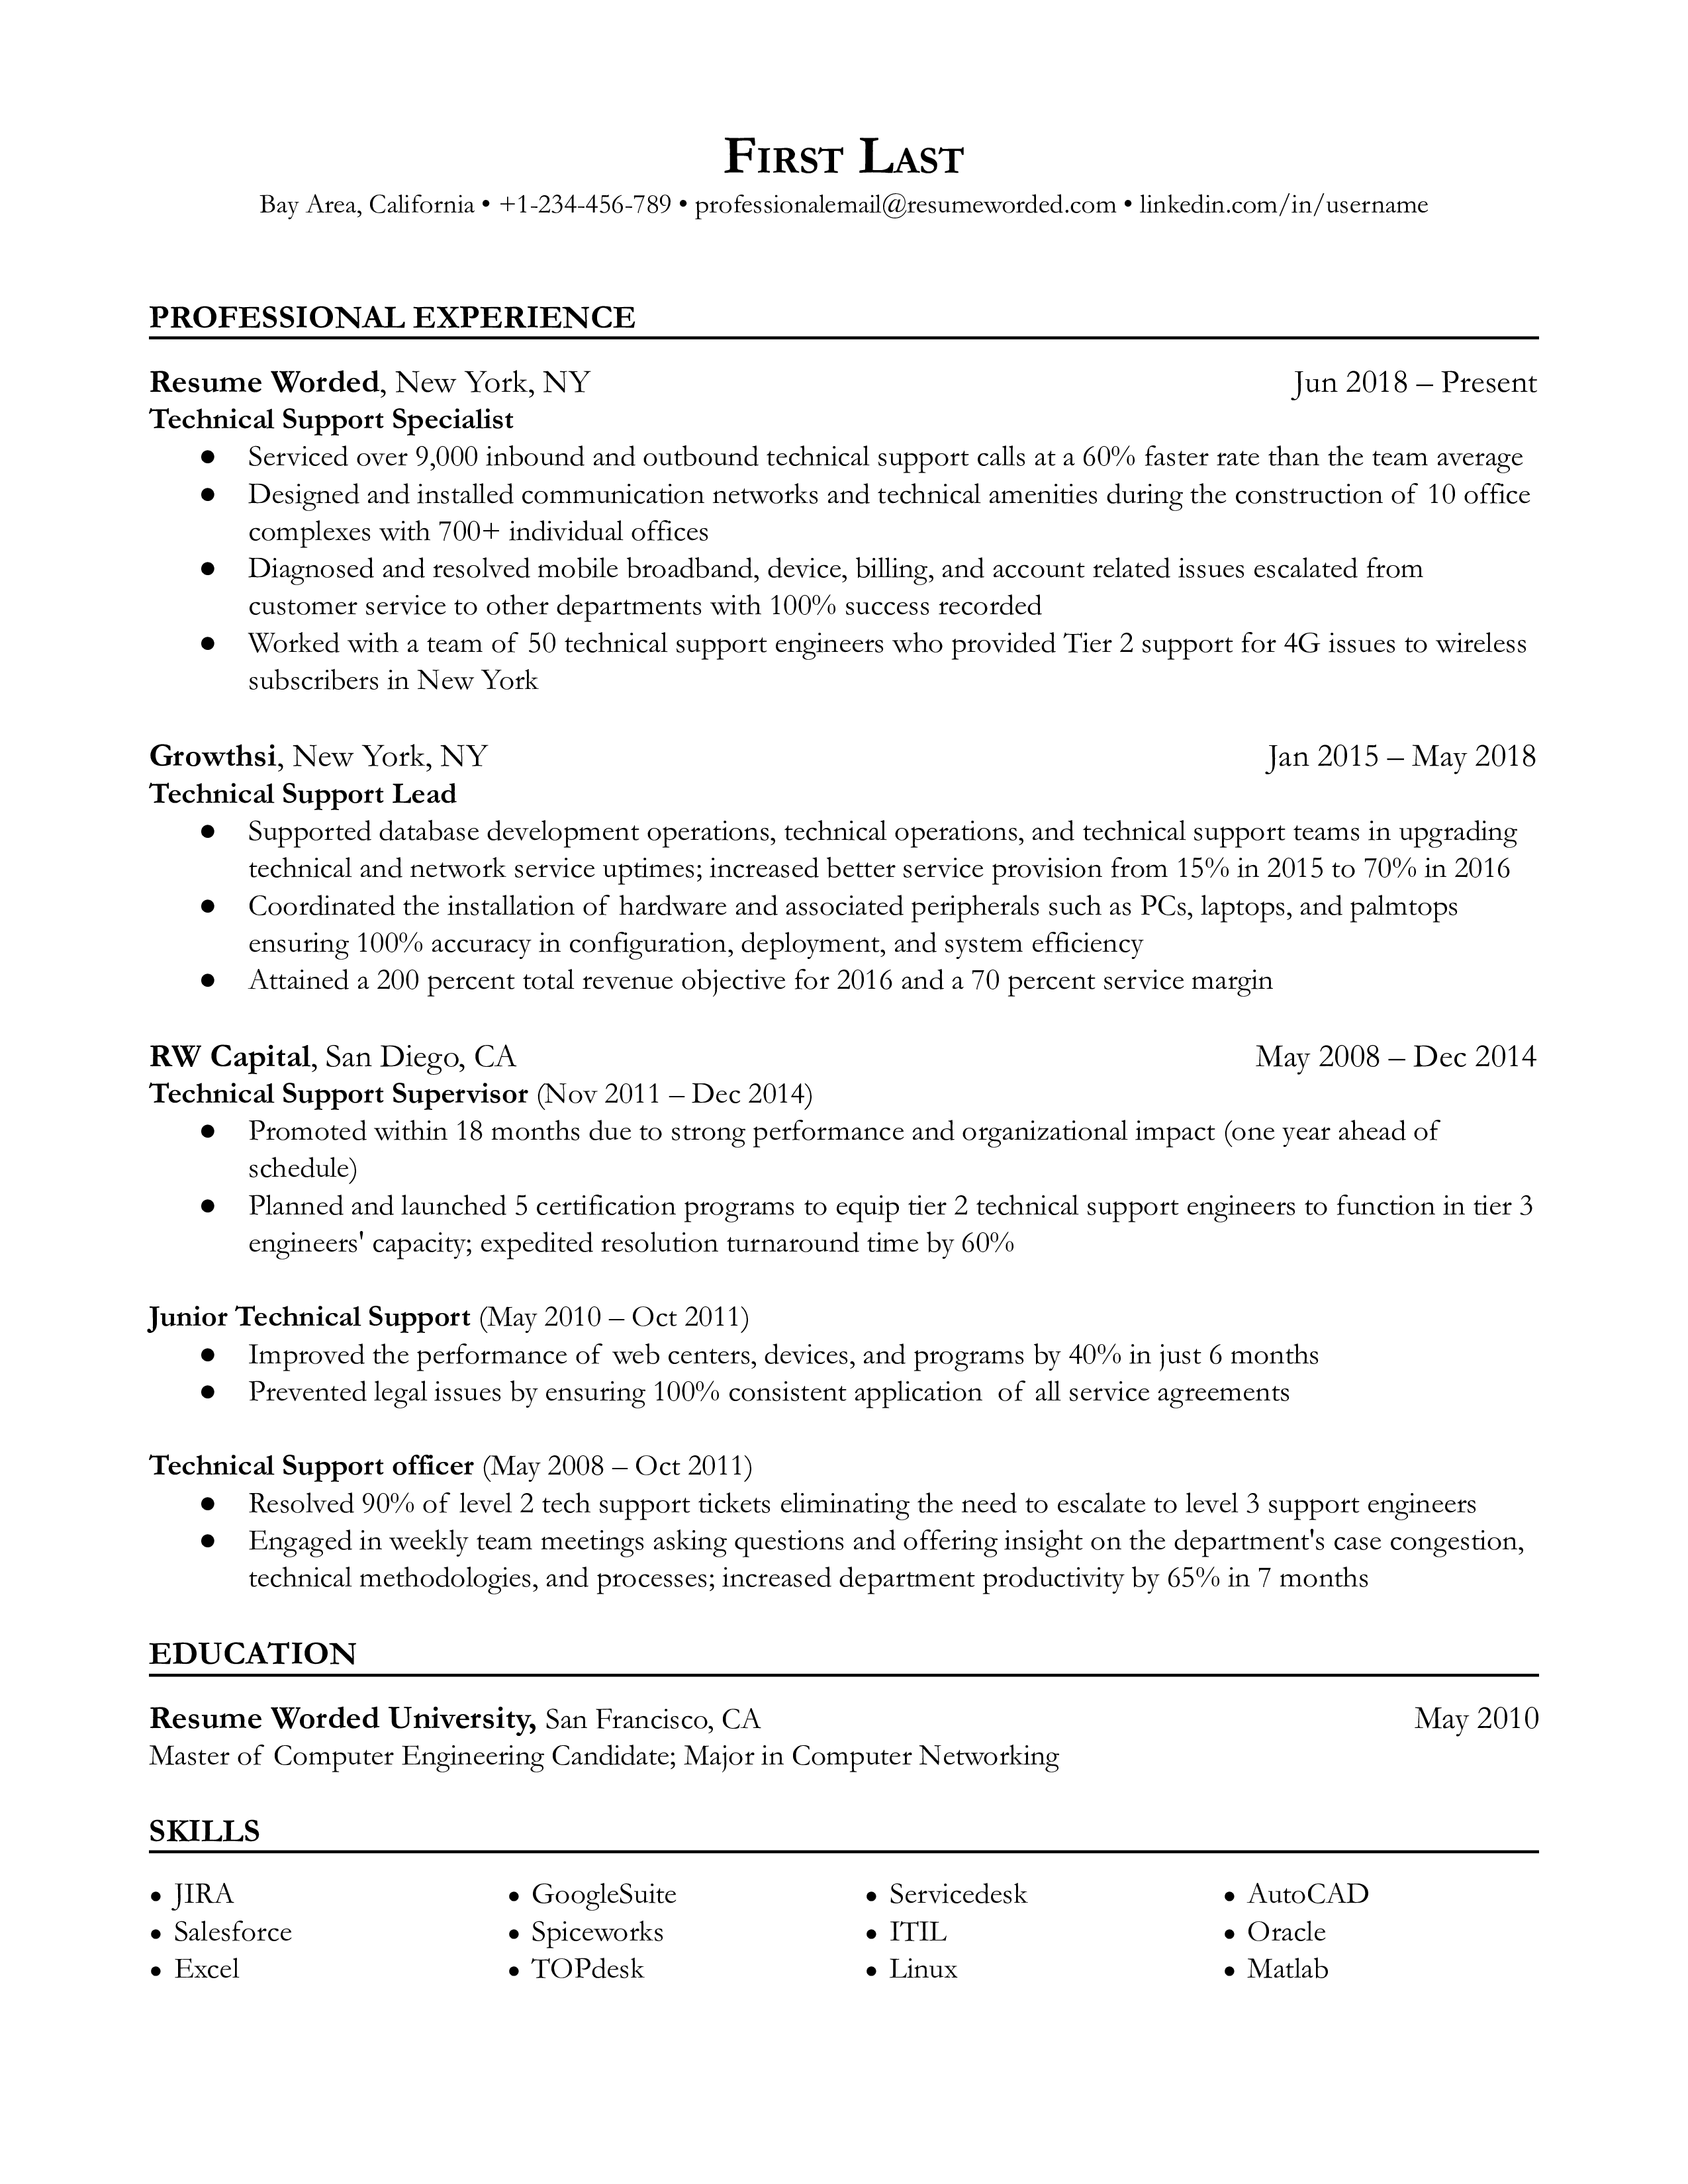 A CV for a Technical Support Specialist highlighting tech skills and problem-solving experiences.